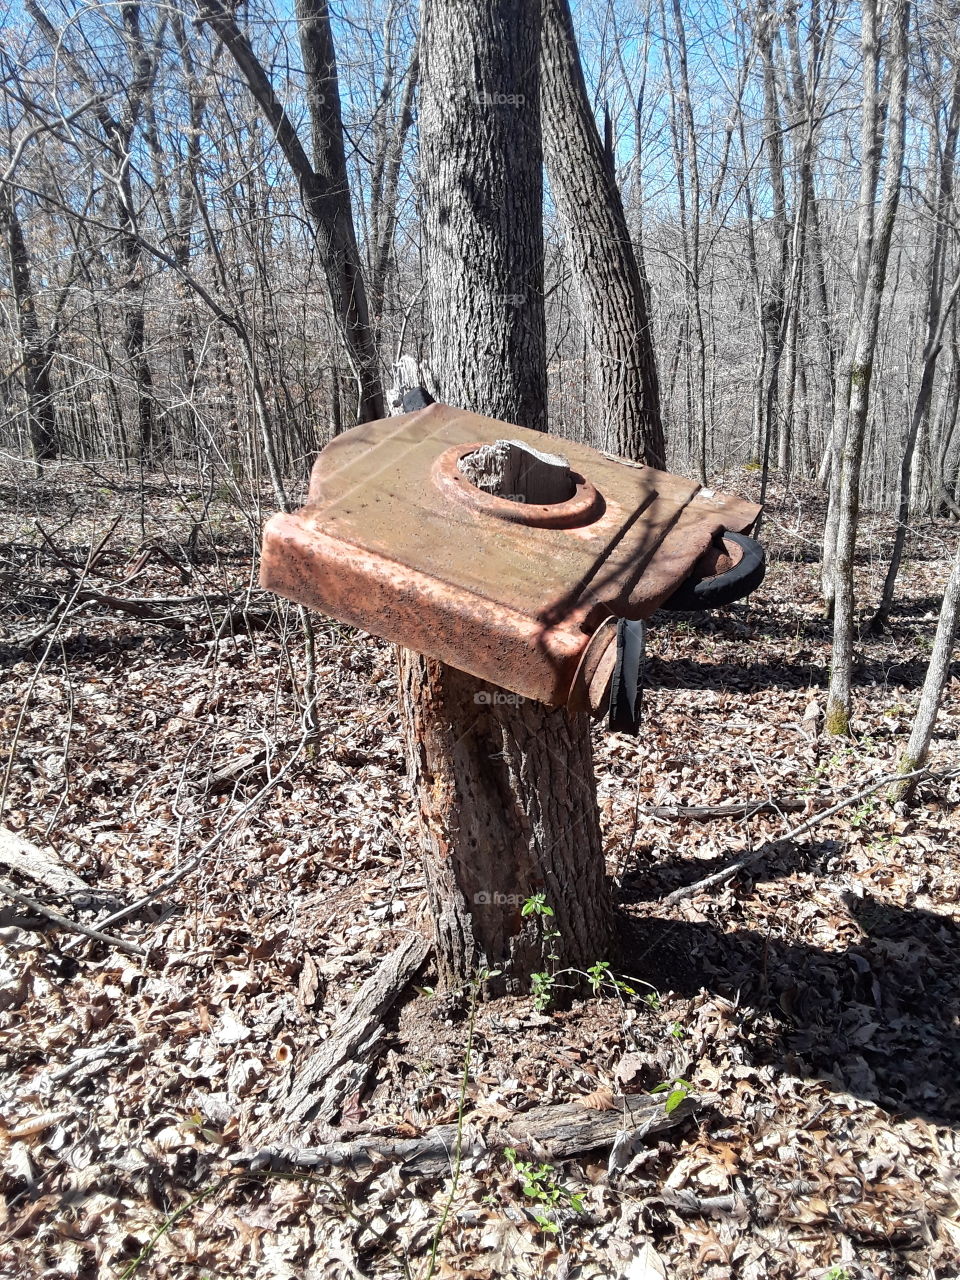 Rusty old lawnmower on top of a stump located miles into a forest